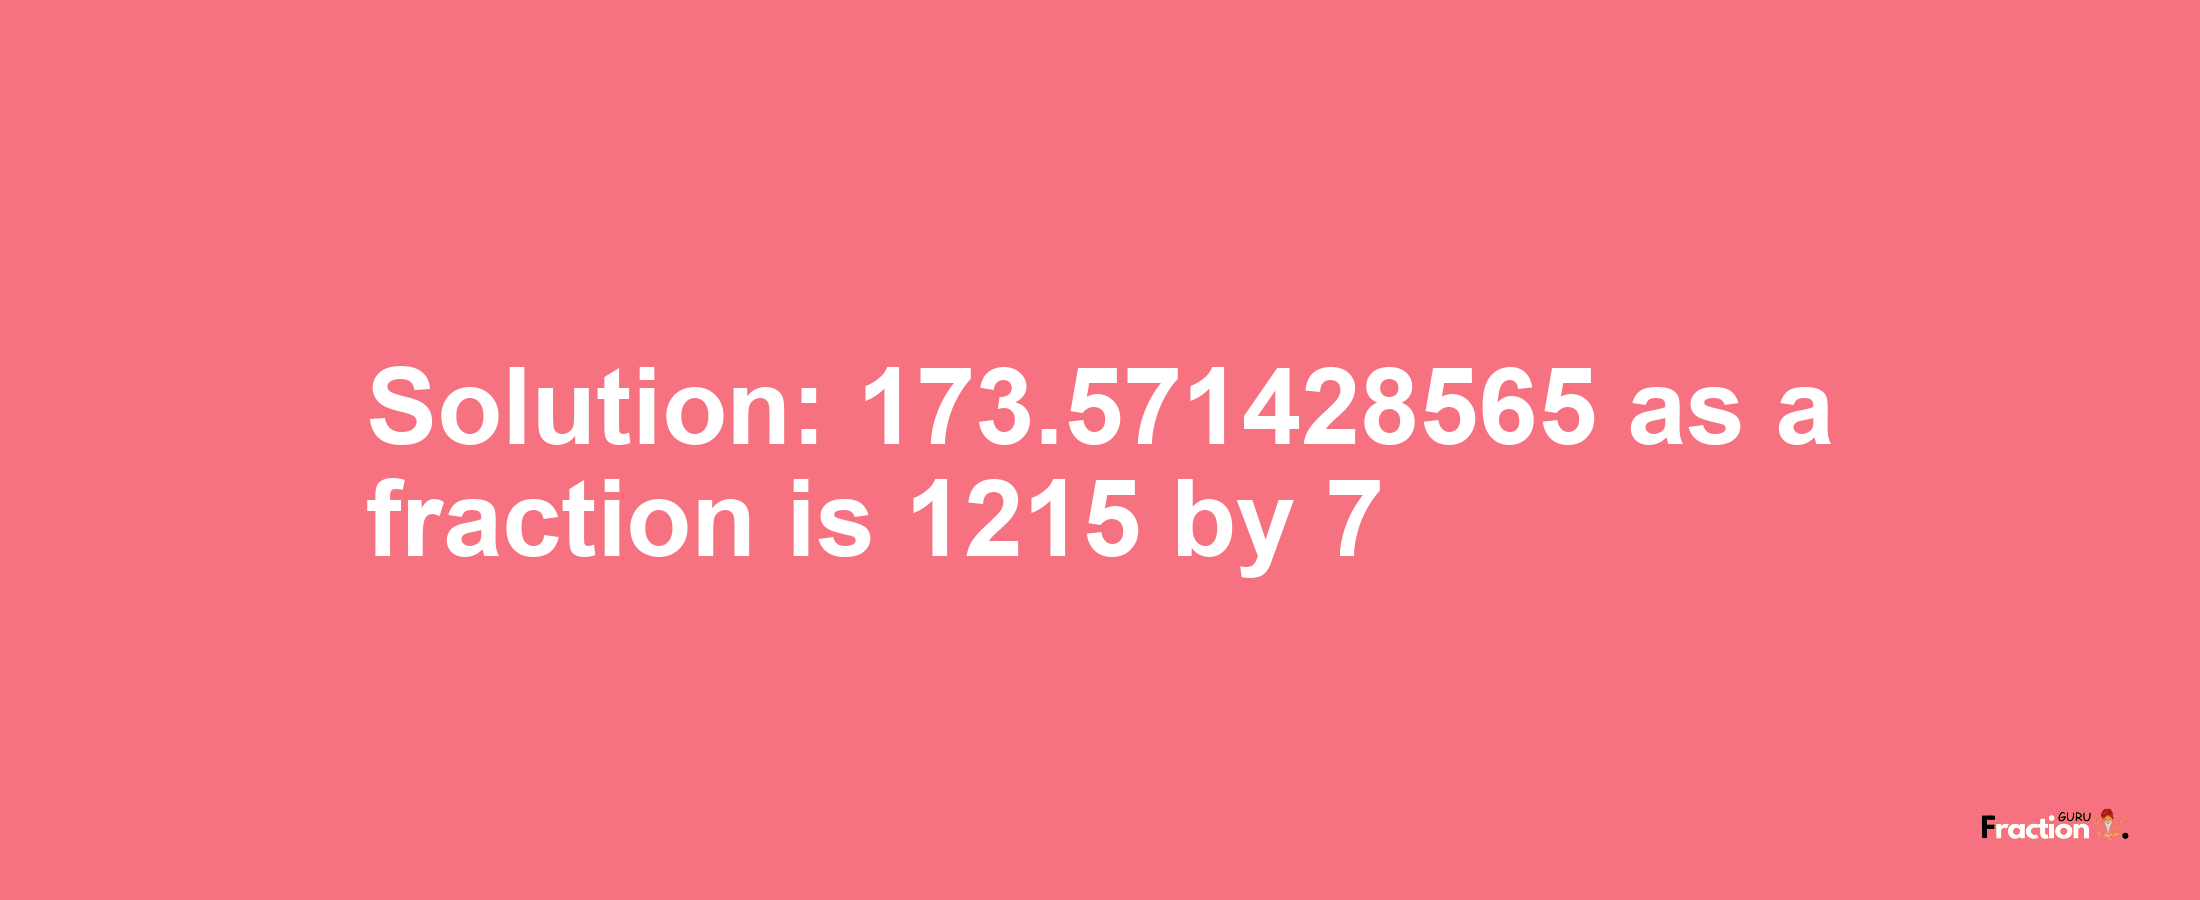 Solution:173.571428565 as a fraction is 1215/7